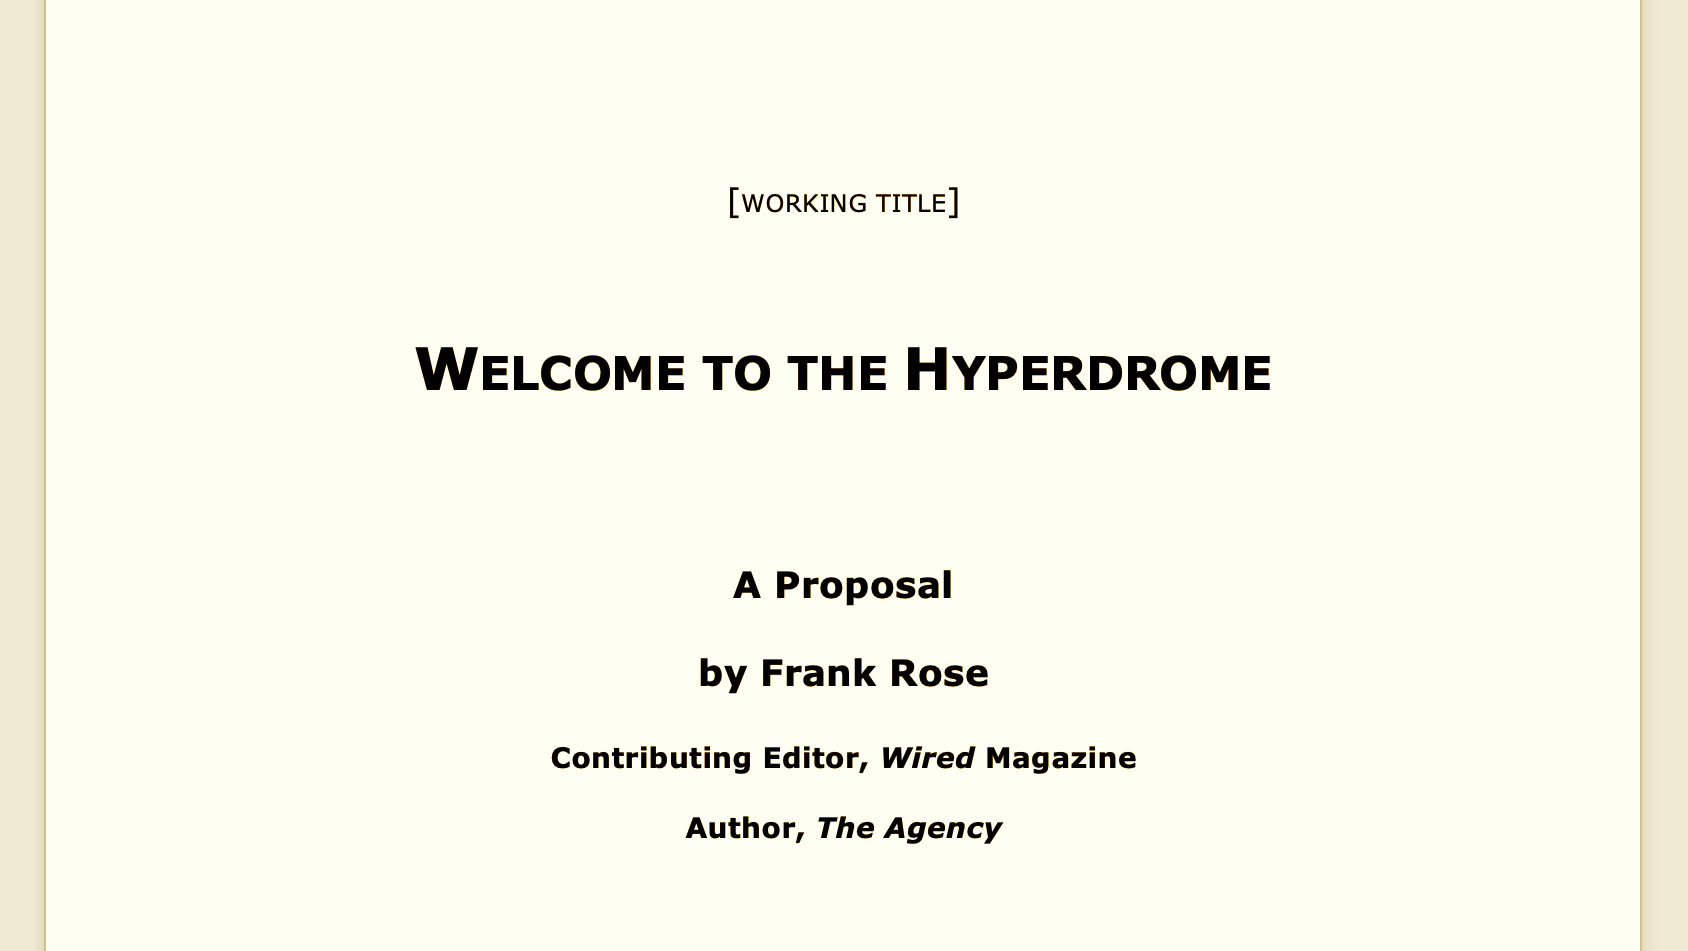 Welcome to the hyperdrome